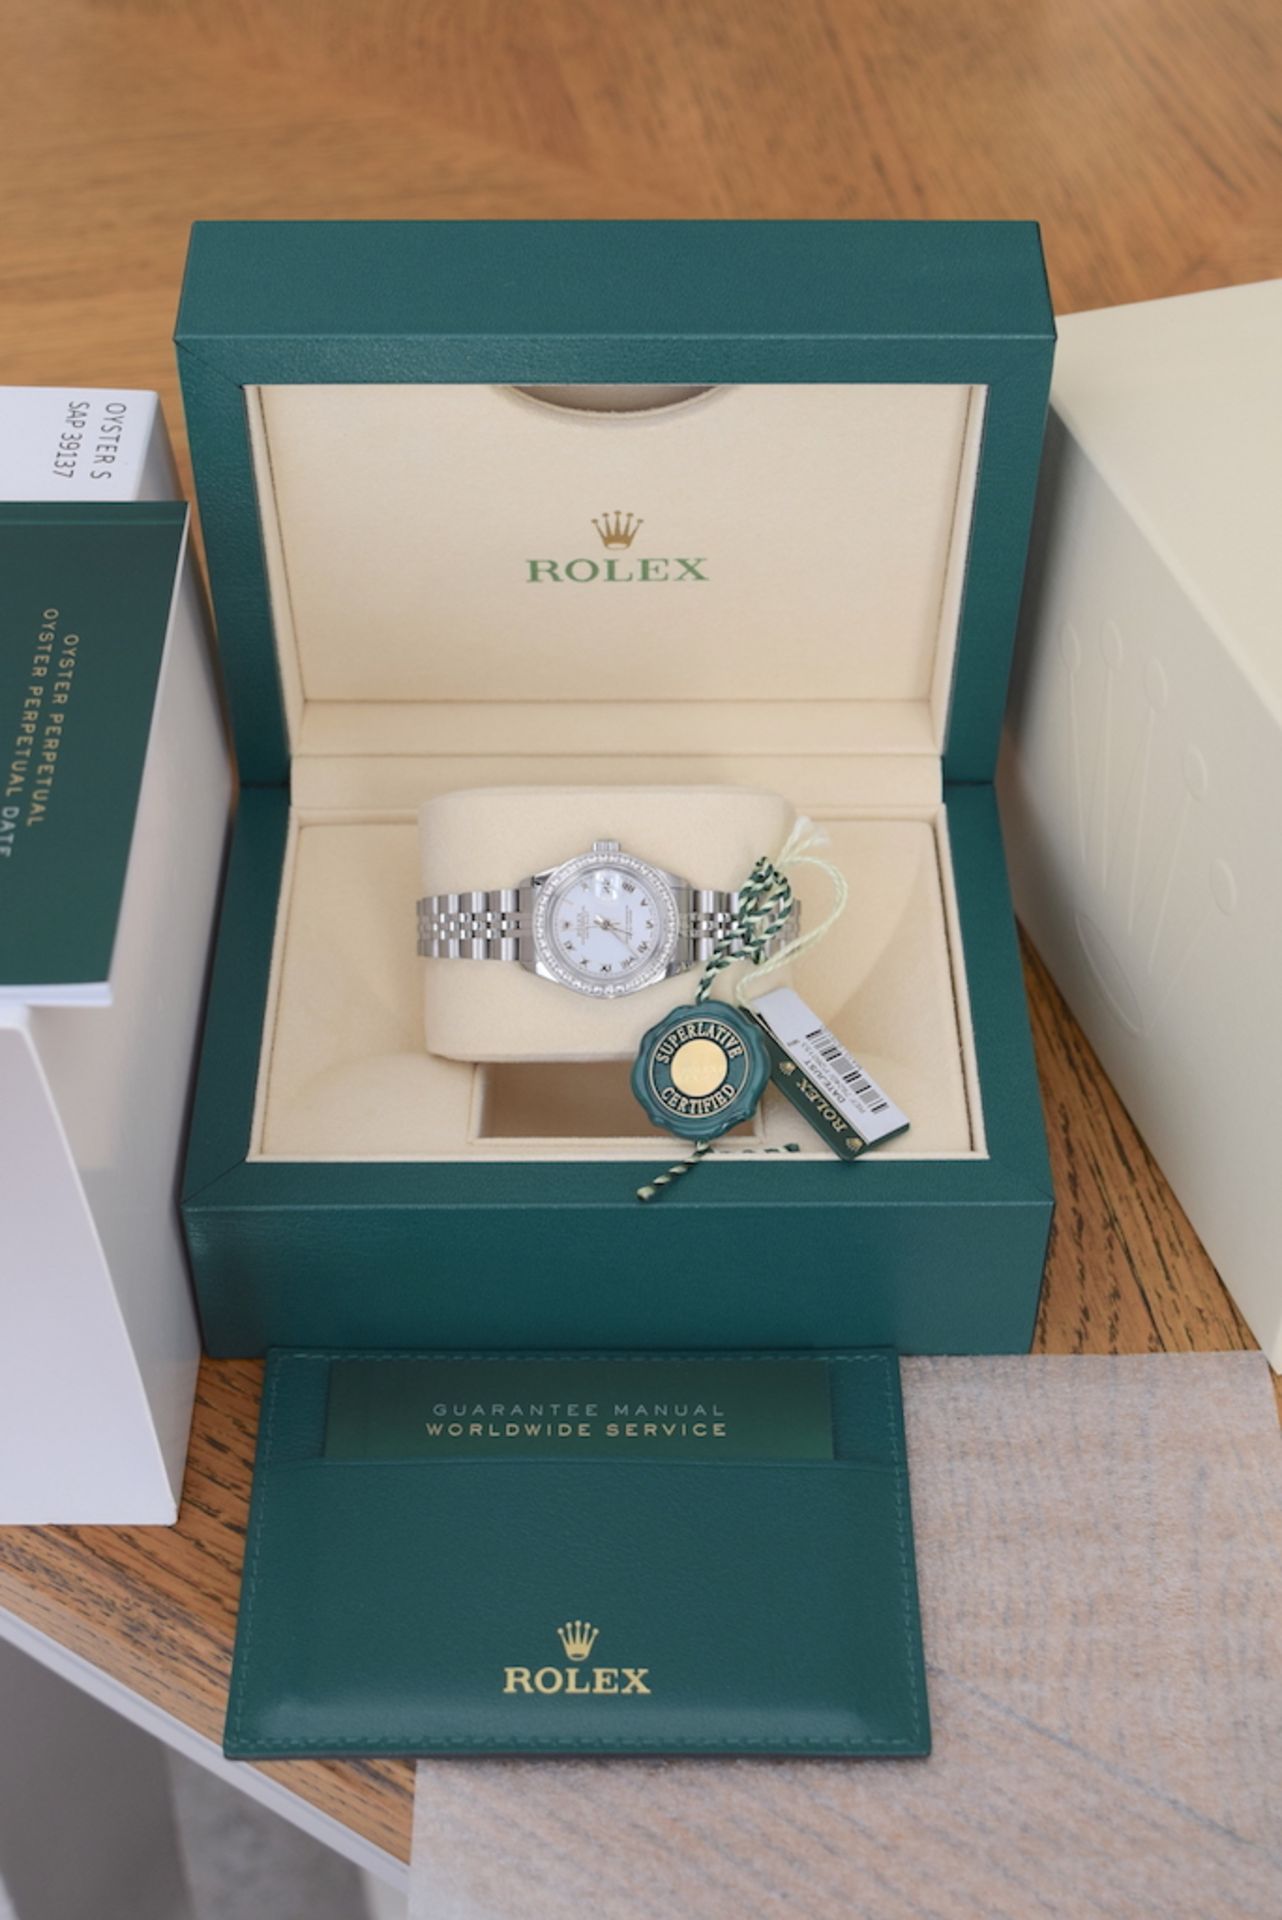 ROLEX Oyster Perpetual 'Datejust' - Stainless Steel/ White Roman Numerals - Image 2 of 15